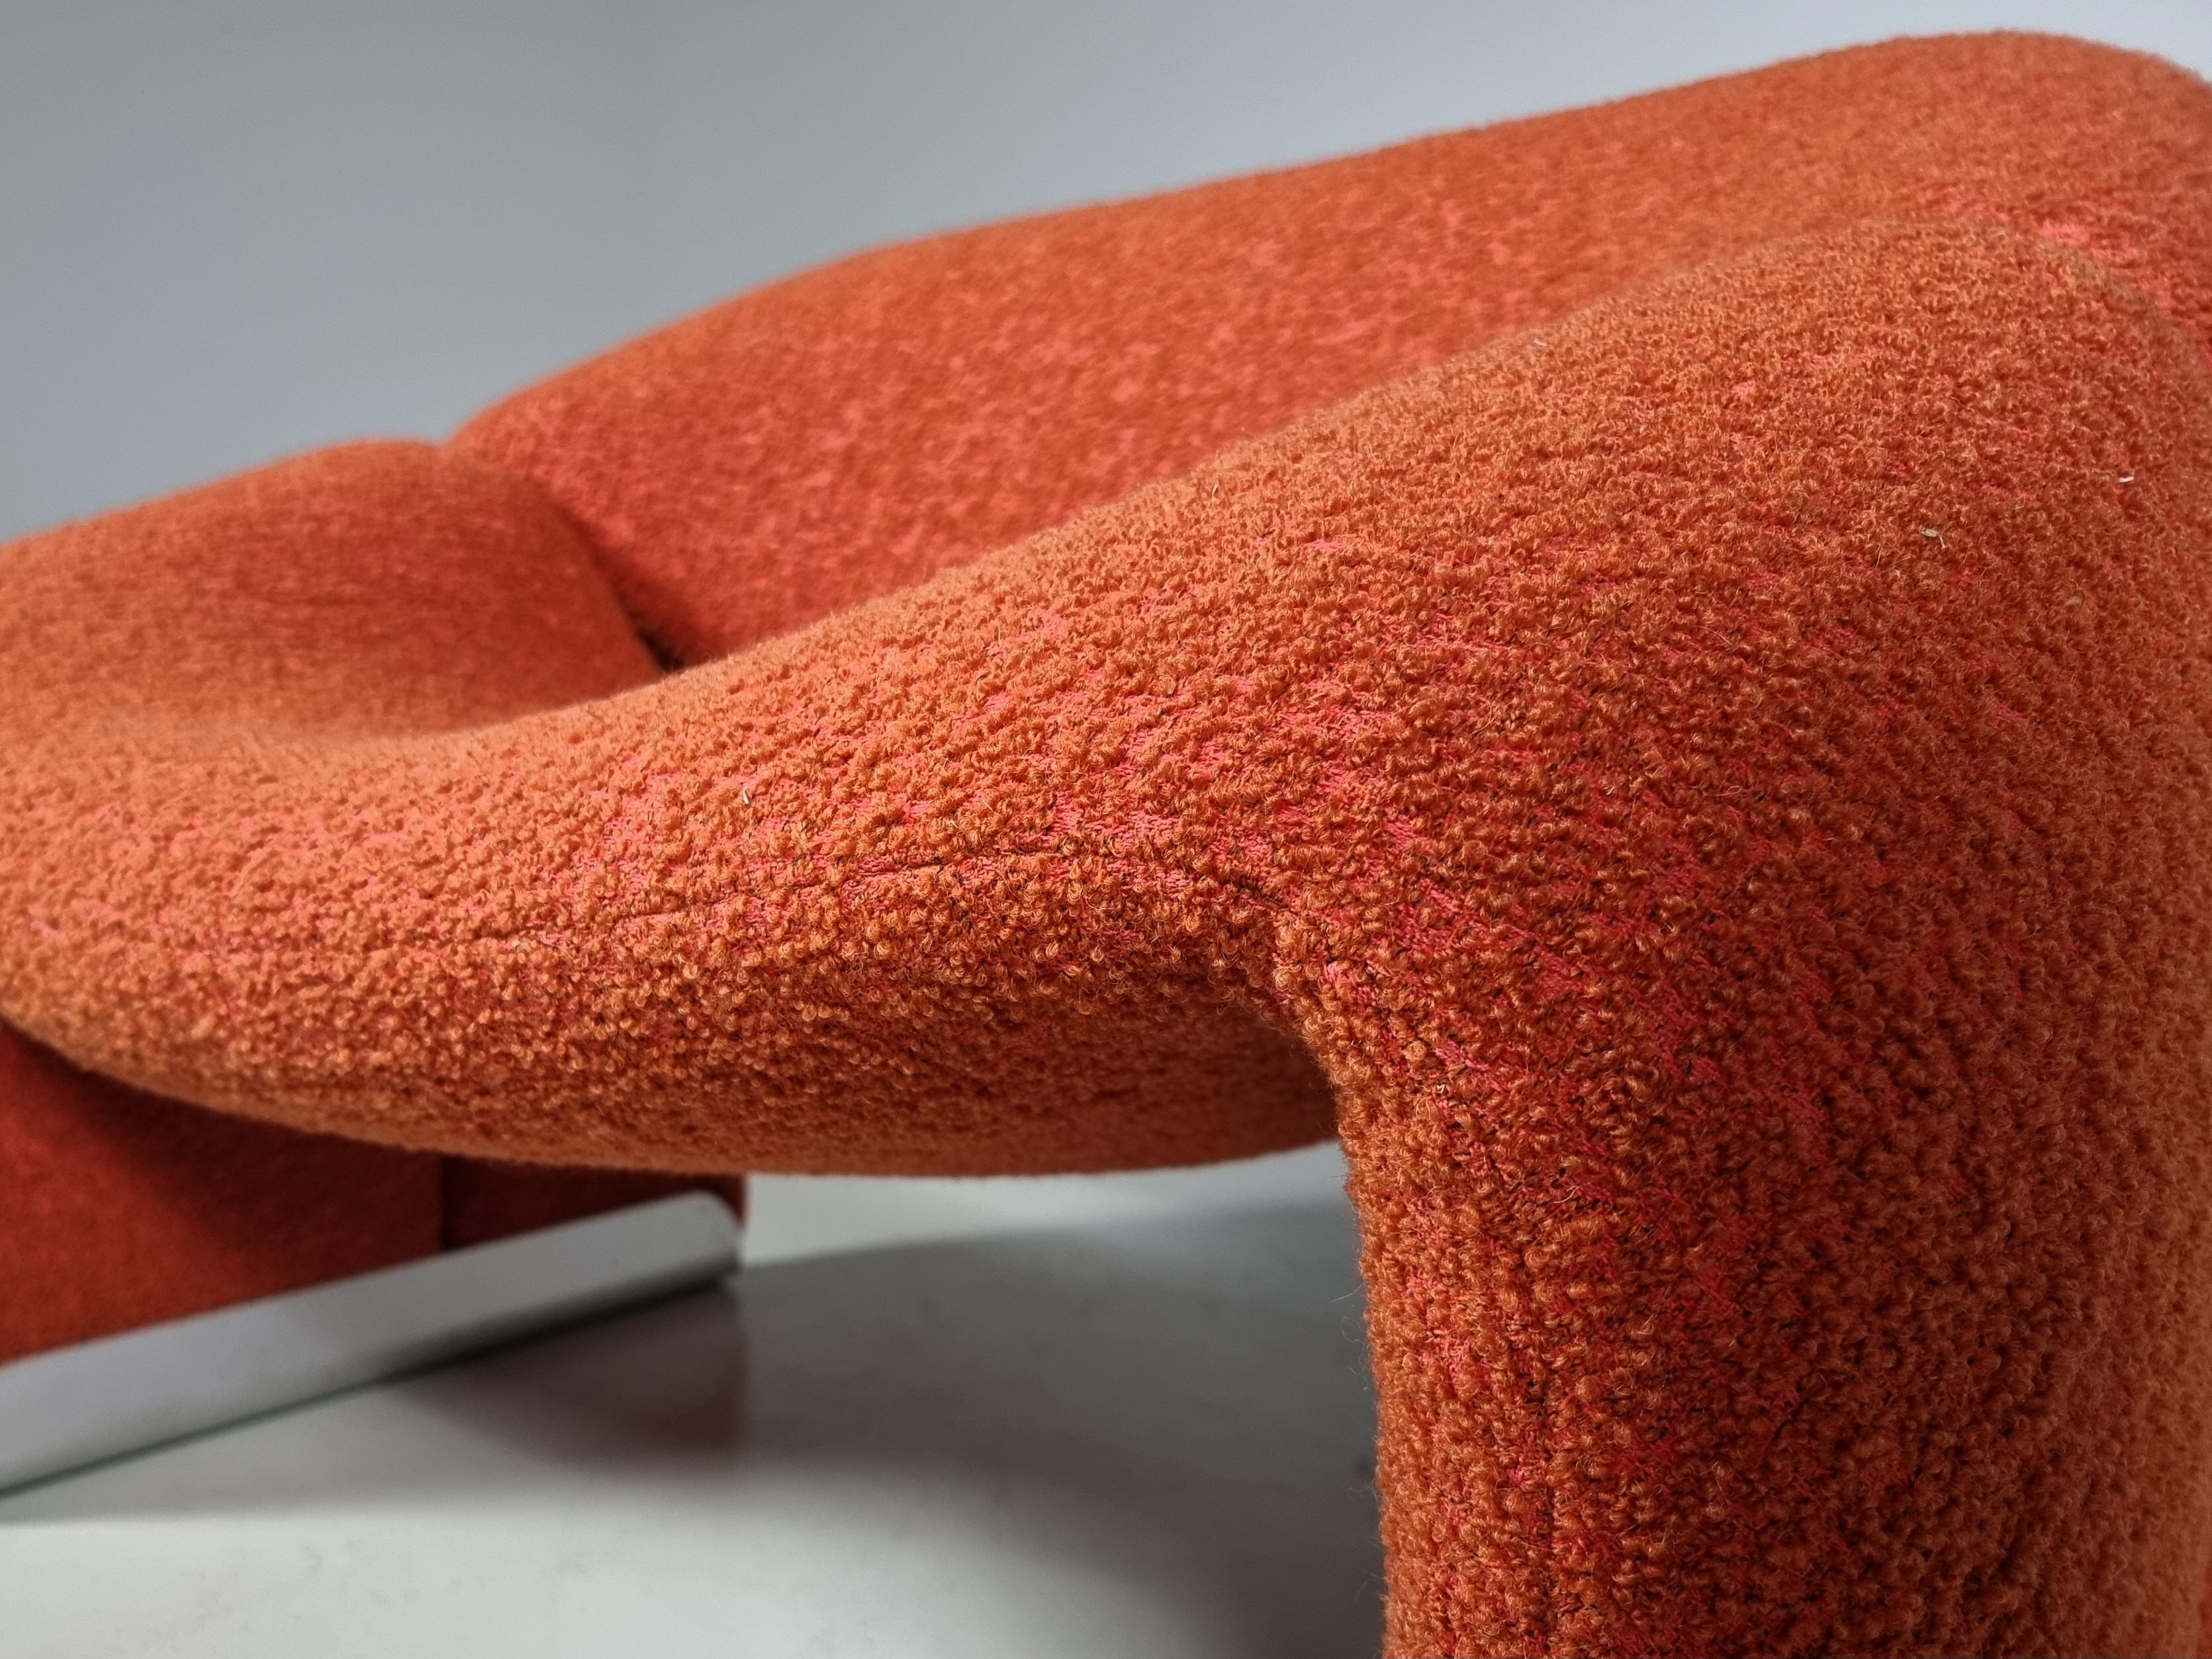 Fabric F598 Groovy 'M' Chair in orange/red boucle by Pierre Paulin for Artifort, 1980s For Sale